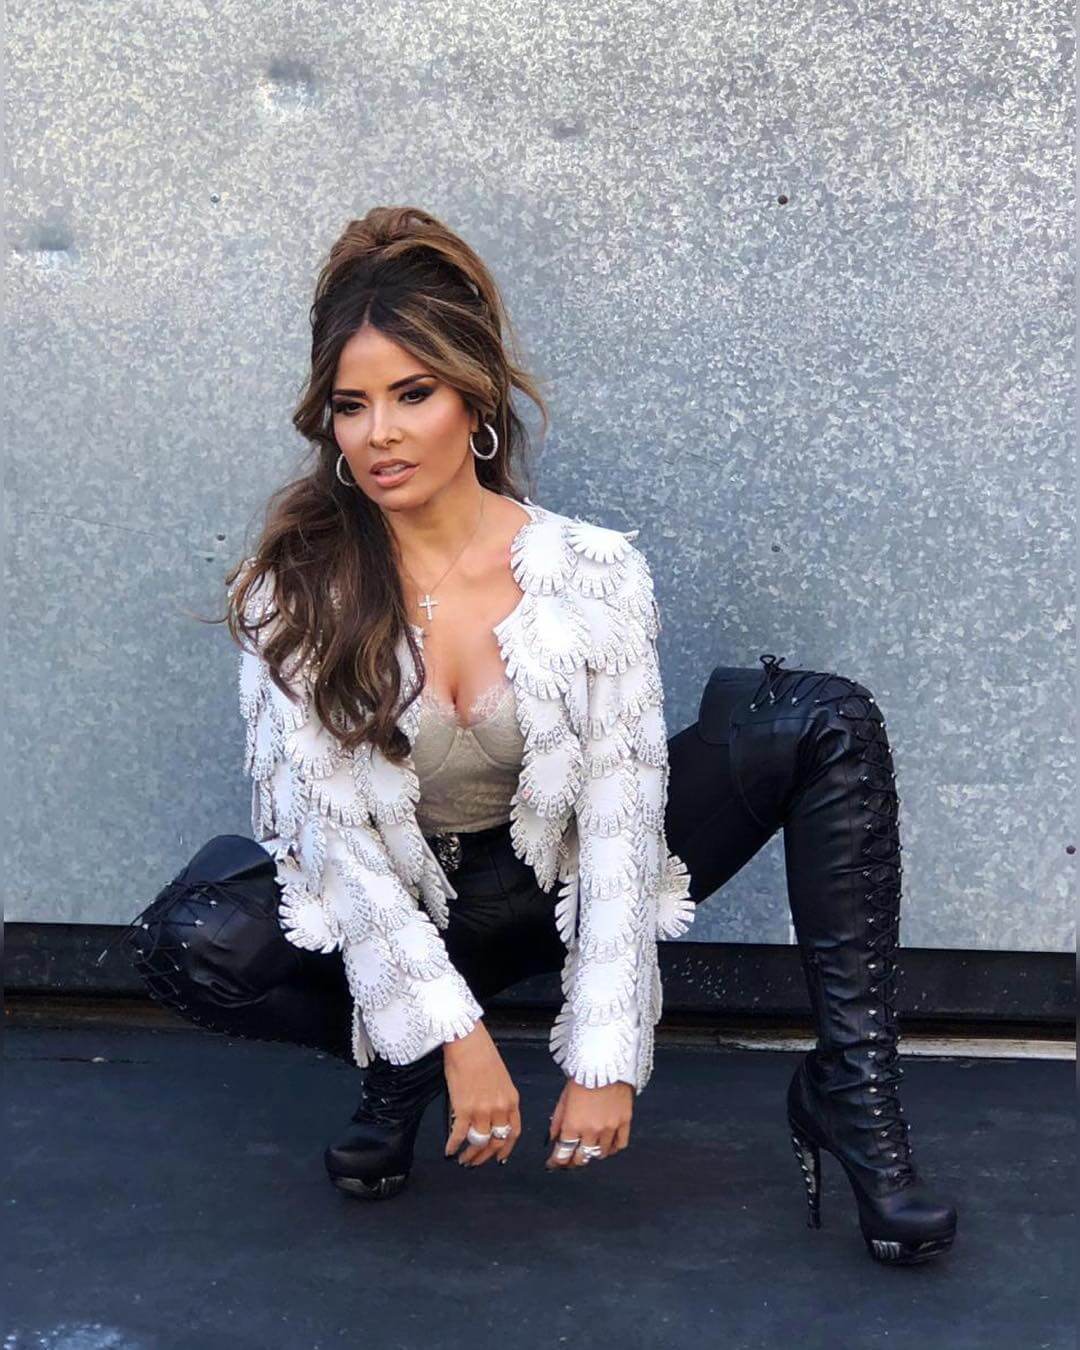 50 Hot Gloria Trevi Photos Will Make Your Day Better.